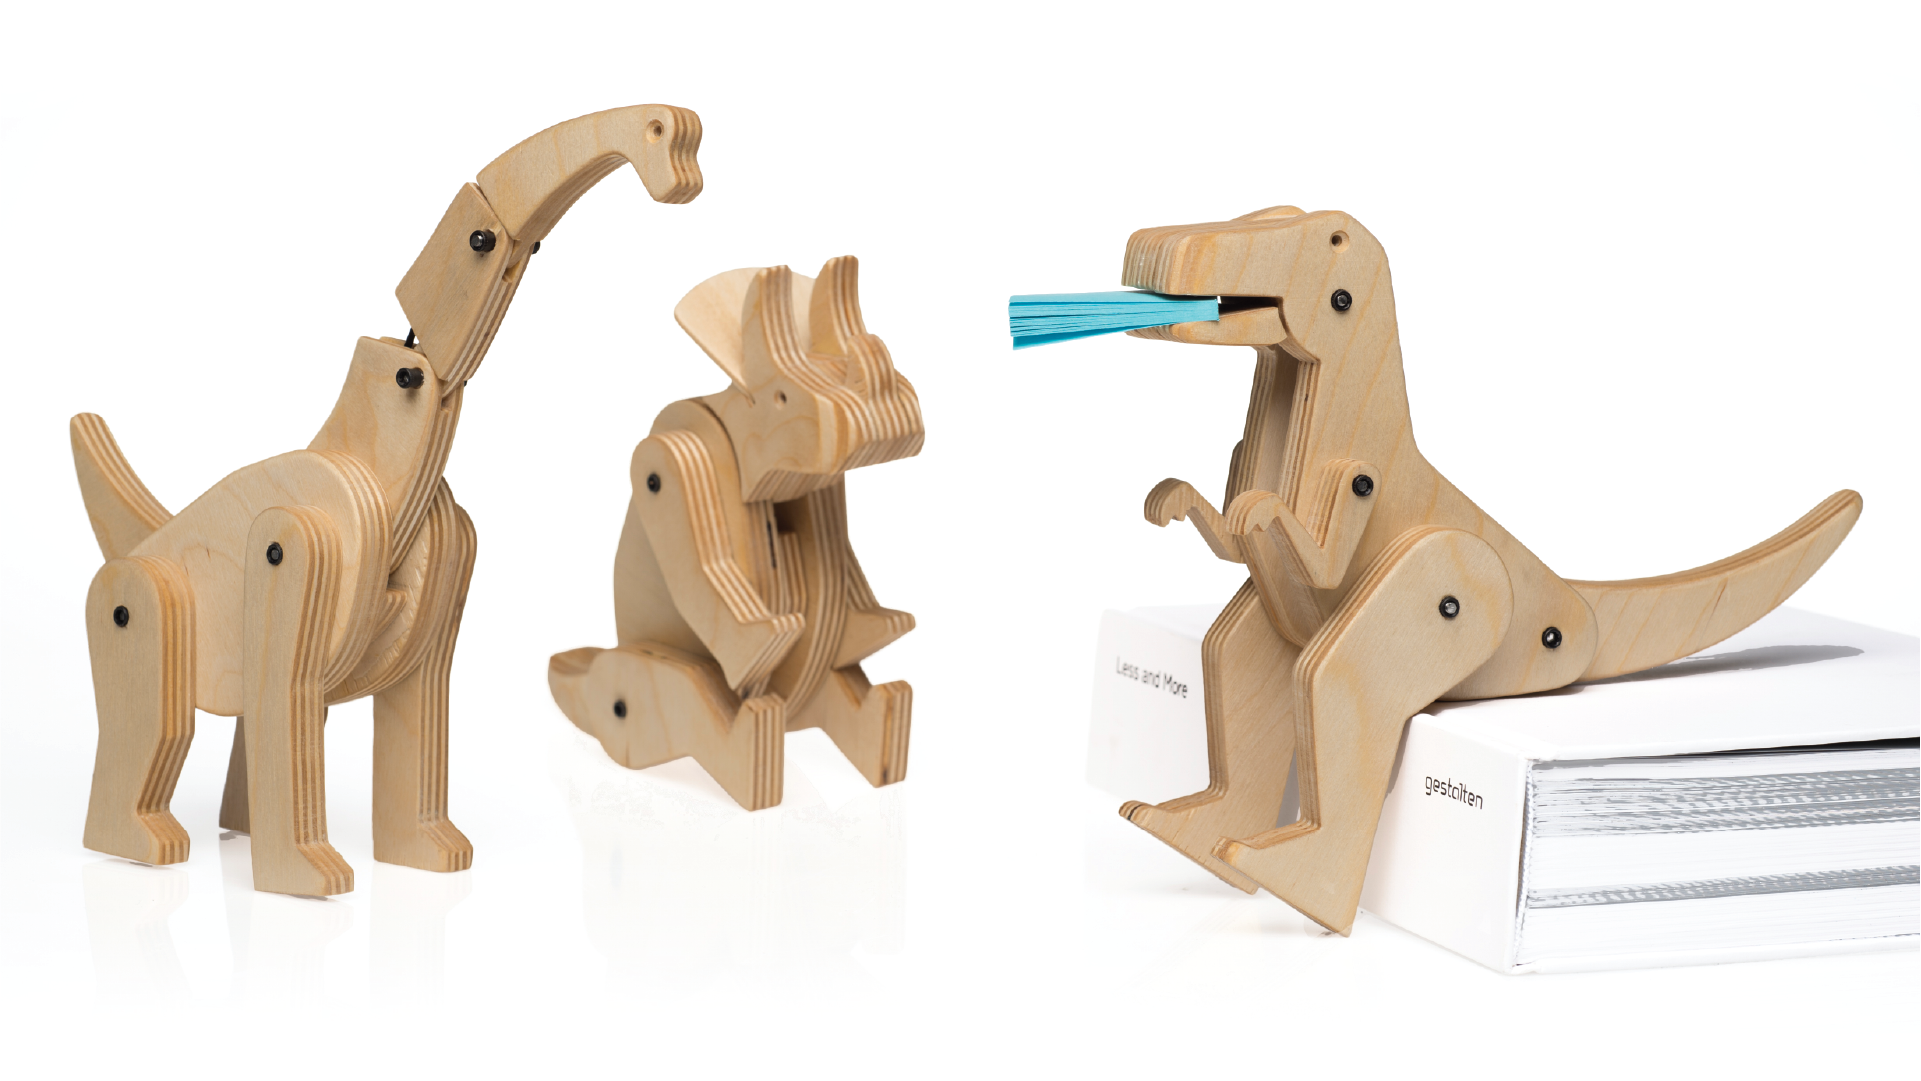 3 wooden toys in different positions. One of the dinosaurs is sitting on a book and holds writing pad its mouth.